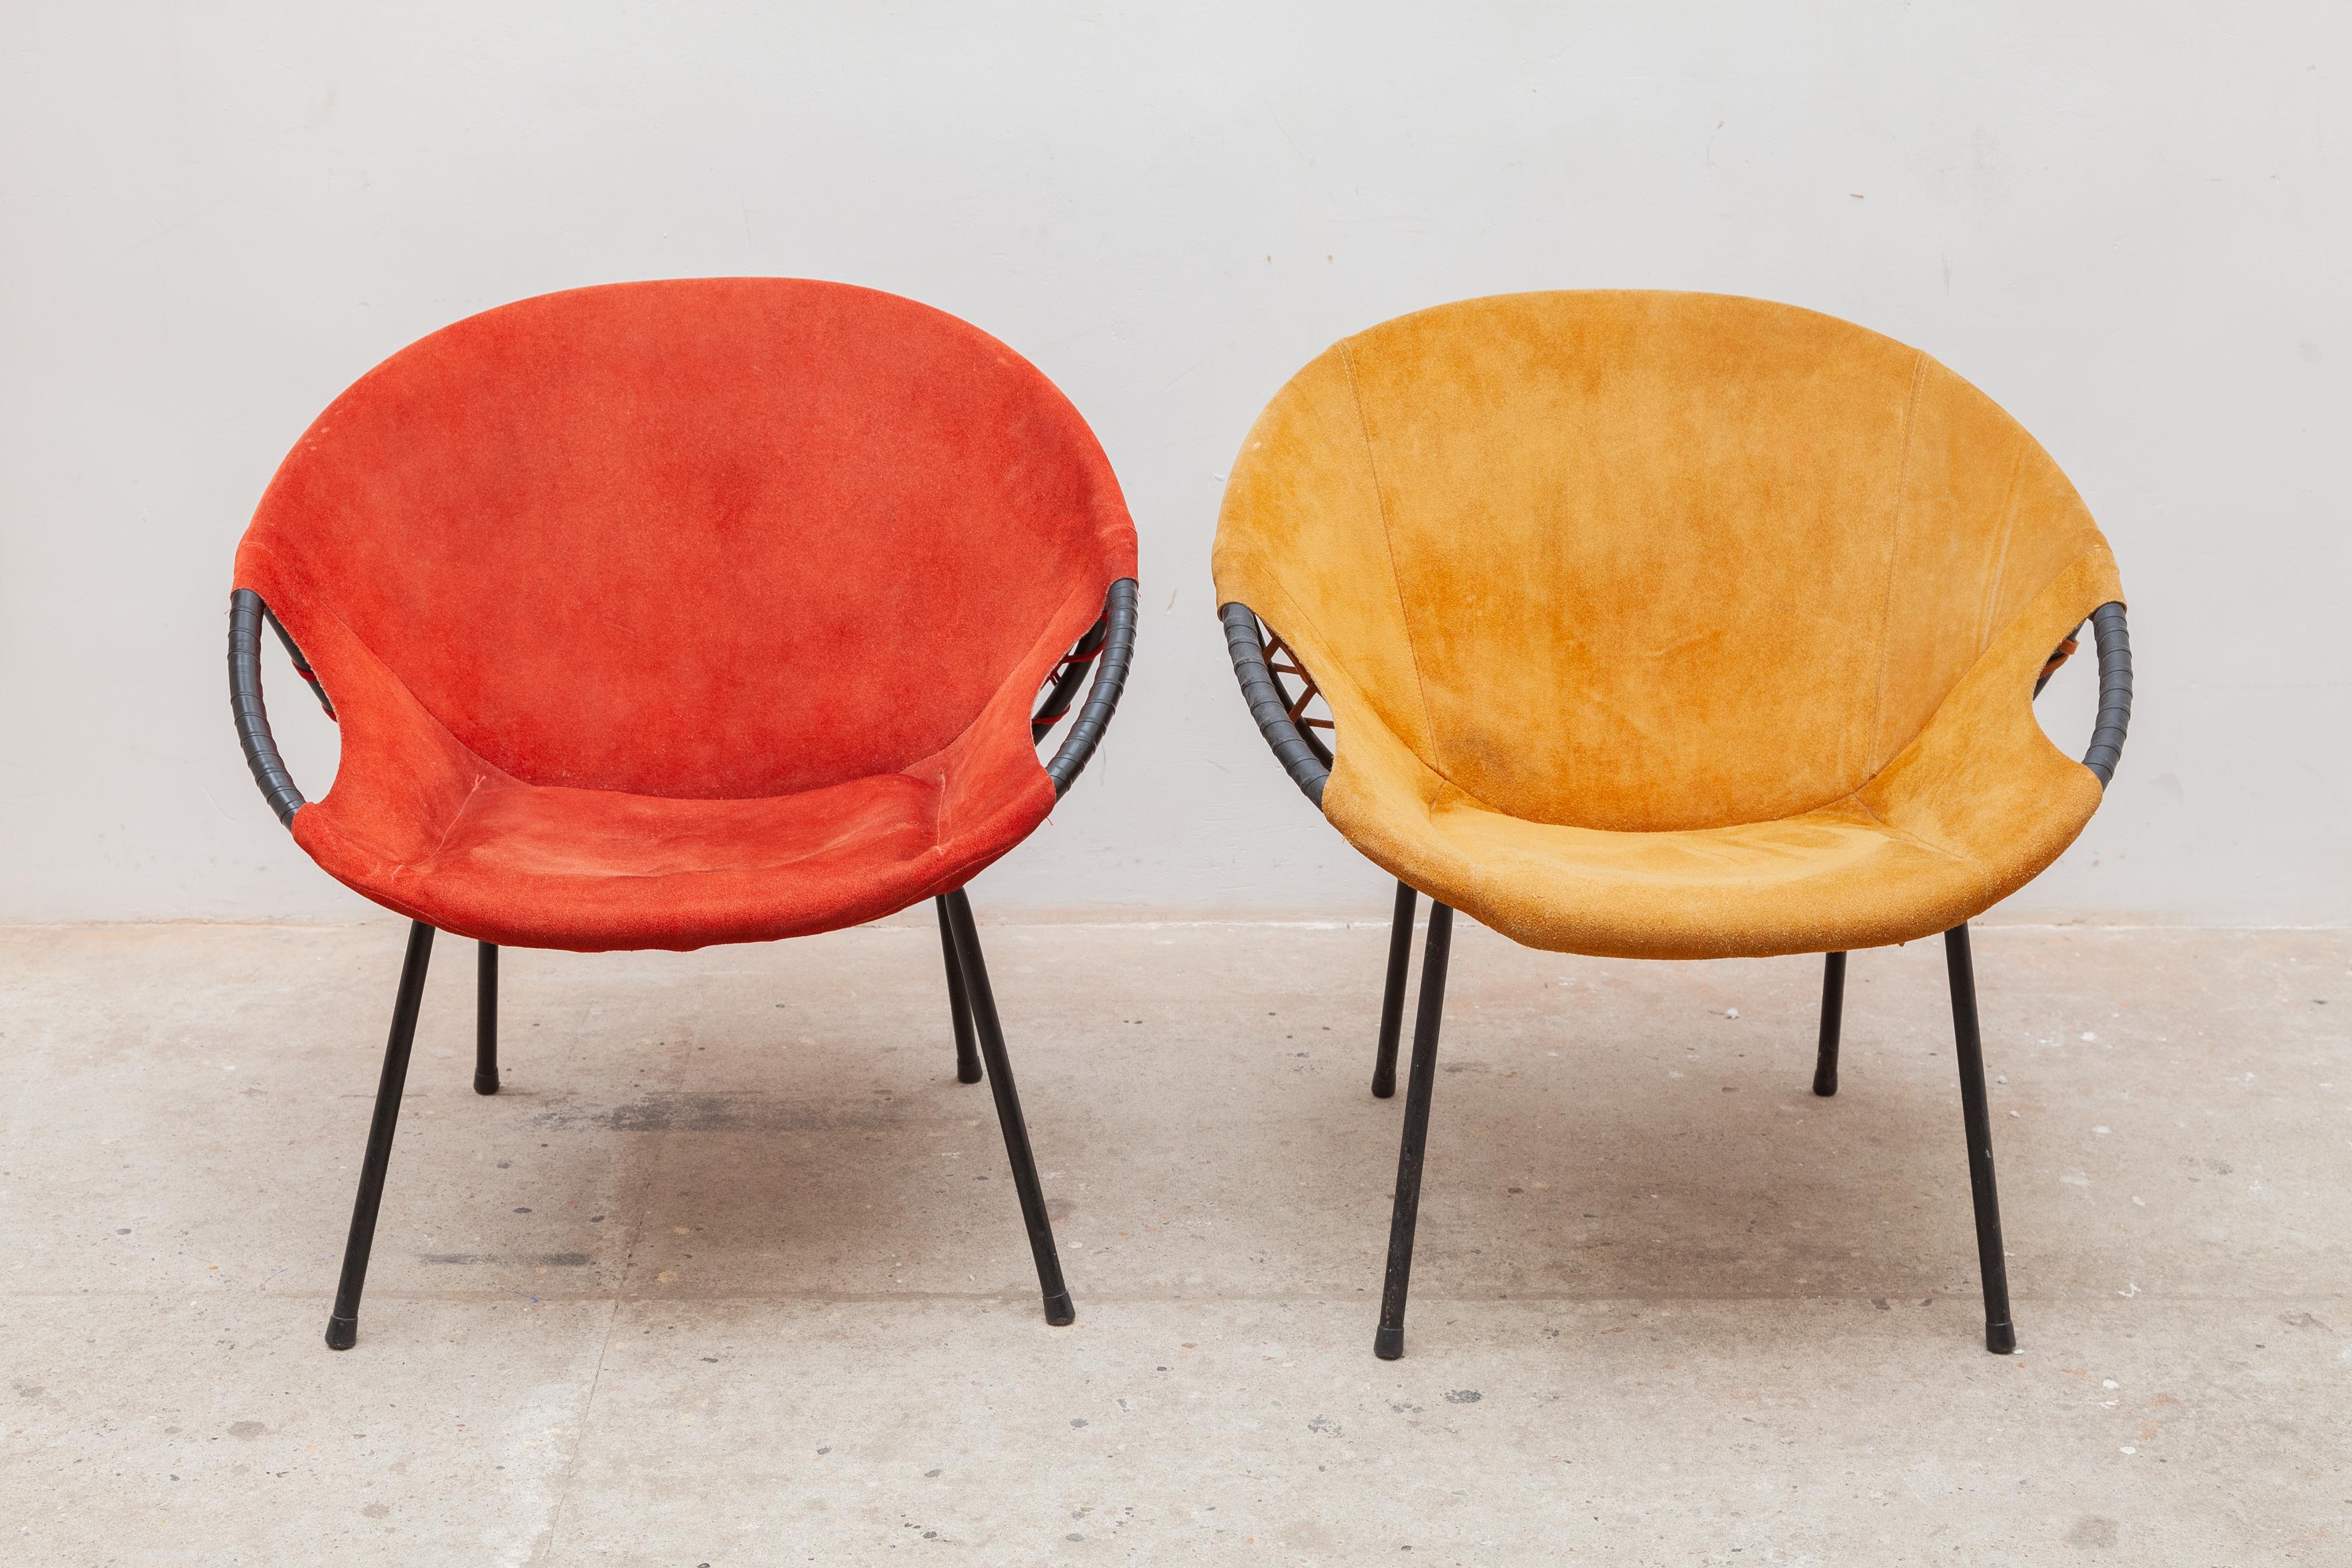 Set of two leather balloon chairs designed by Hans Olsen in the 1950s, is very comfortable and has a very characteristic and identifiable shape. The piece comprises a black metal frame with yellow and red colored orange suede leather covering